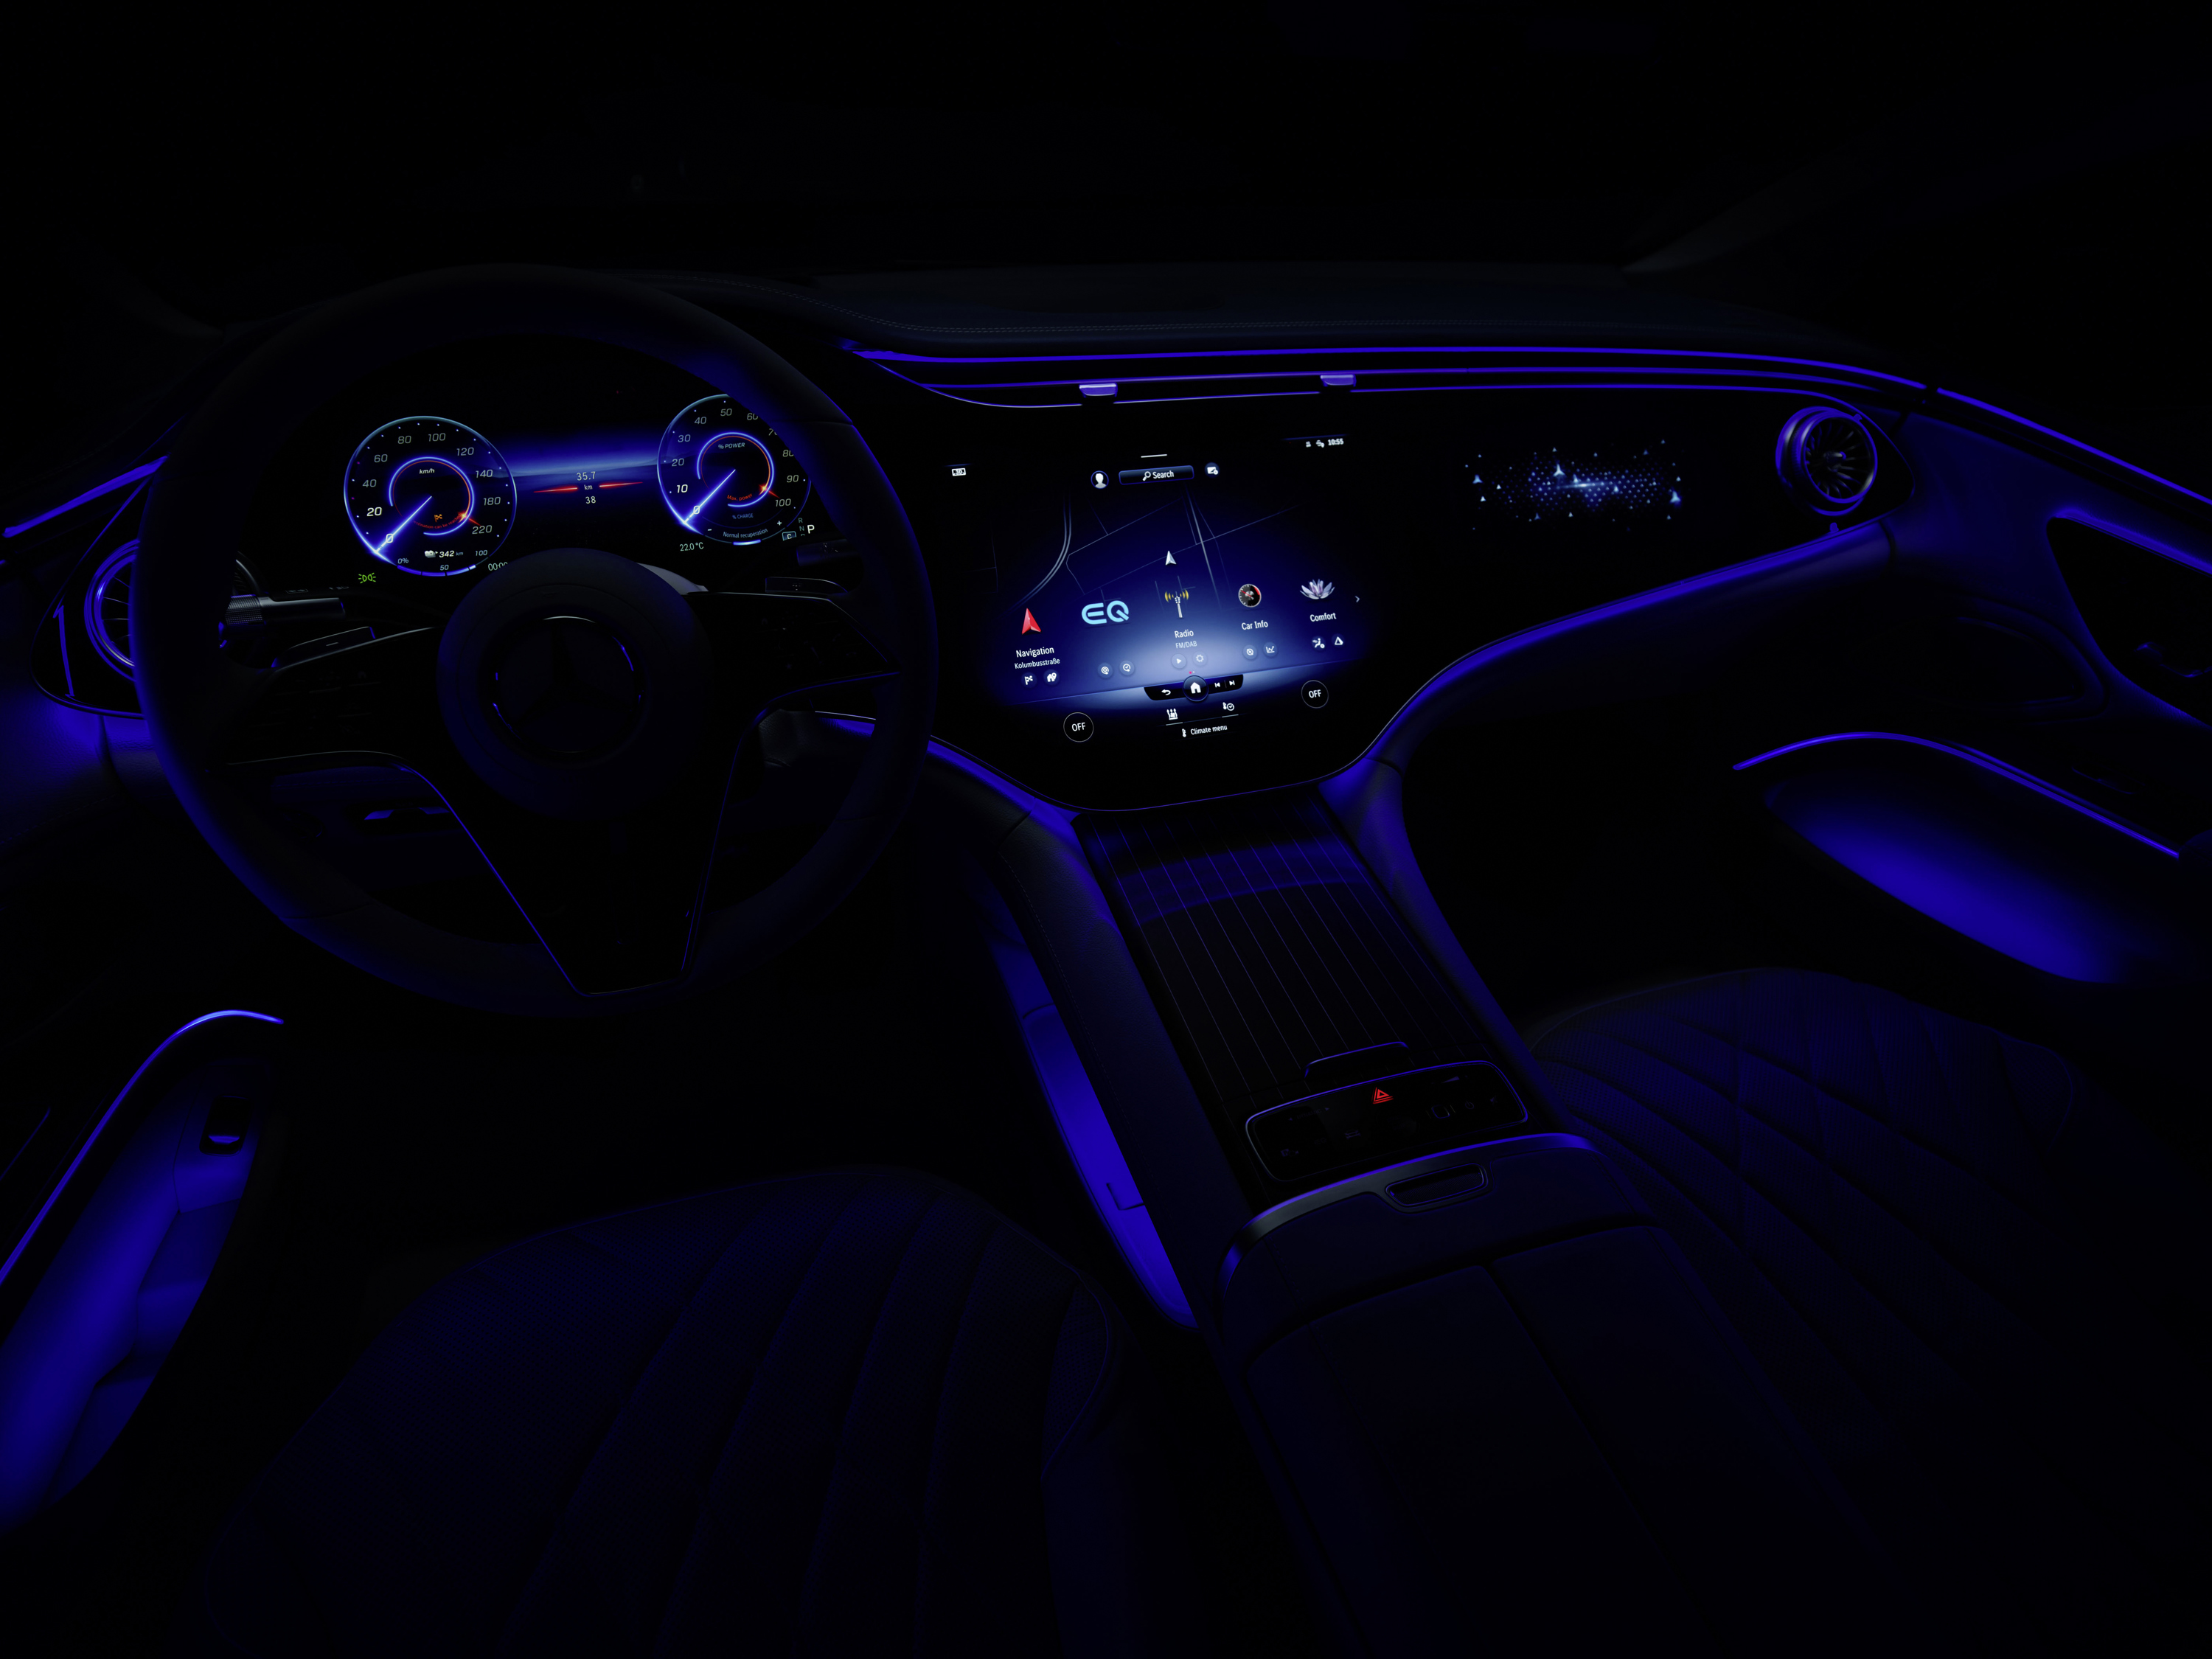 The changing mood in auto internal lighting